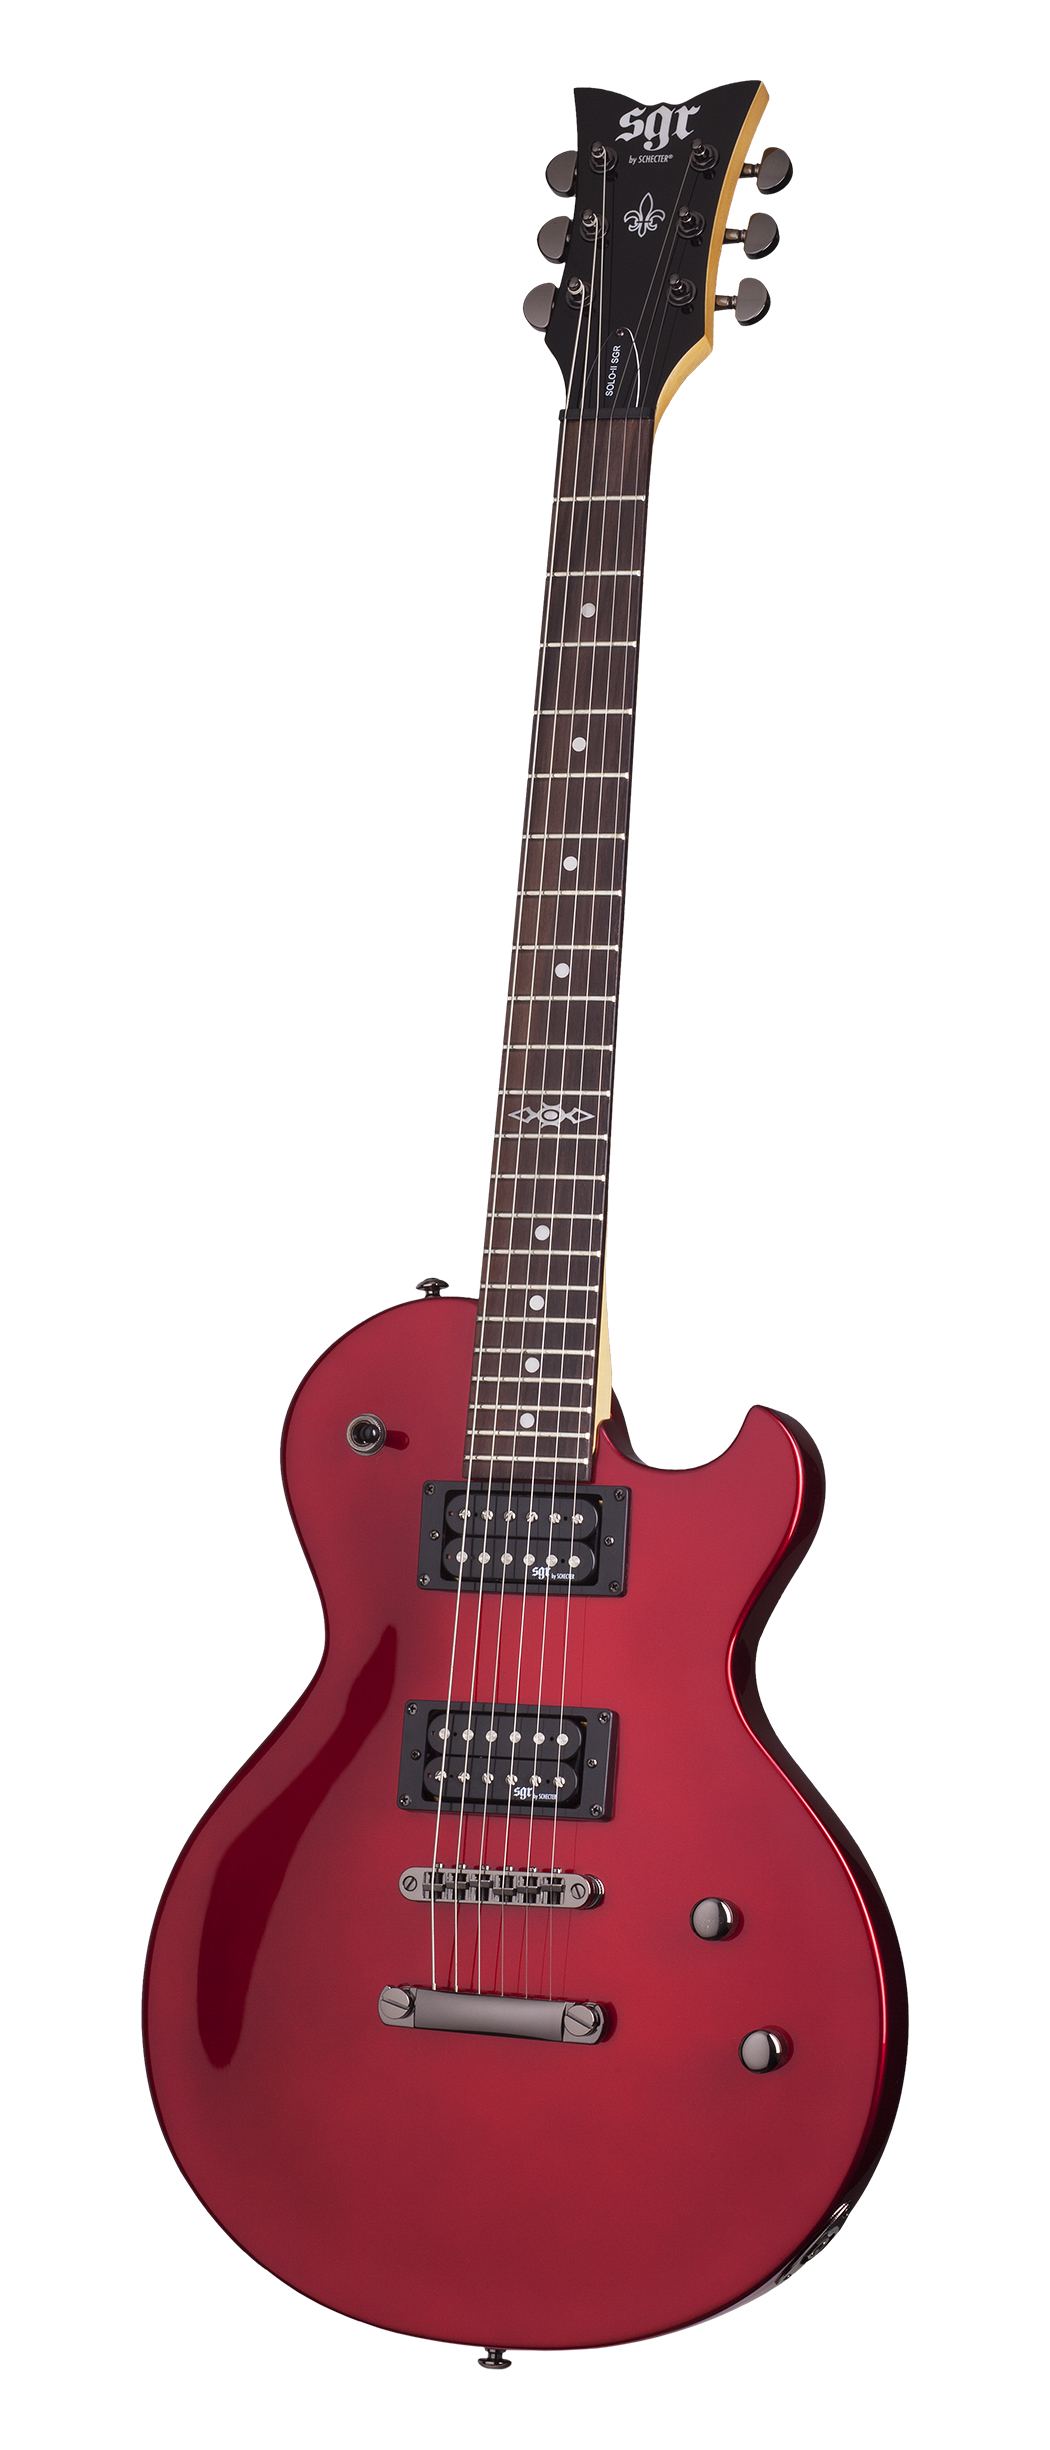 Электрогитары Schecter SGR SOLO II MRED электрогитары schecter sgr solo ii mred